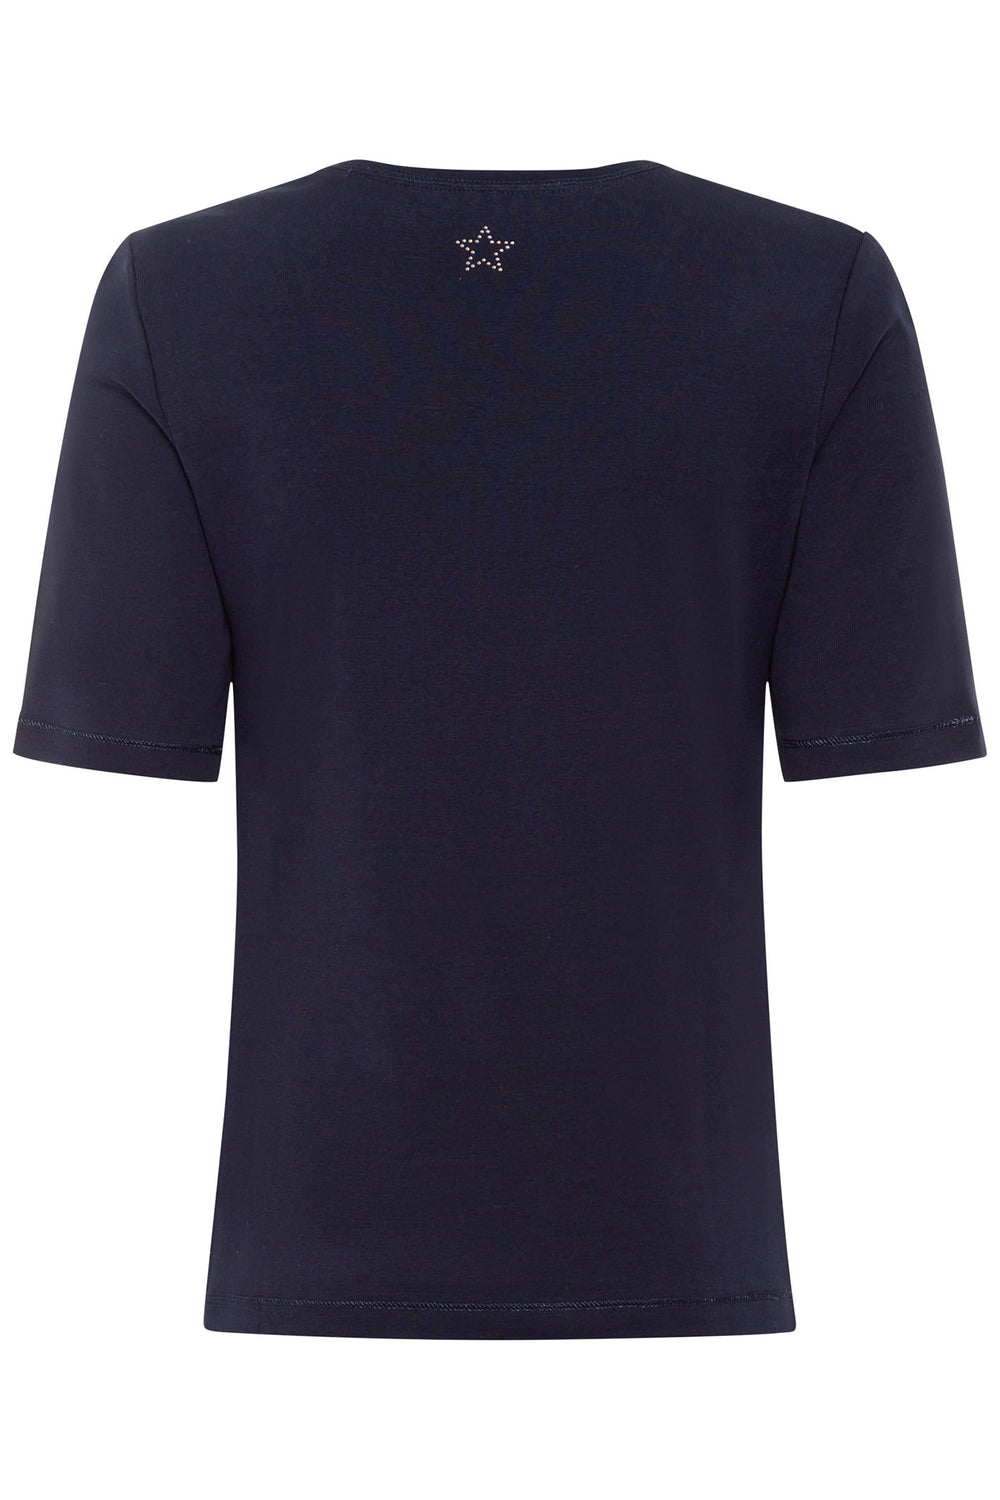 Olsen 11100177 Power Navy T-Shirt - Experience Boutique